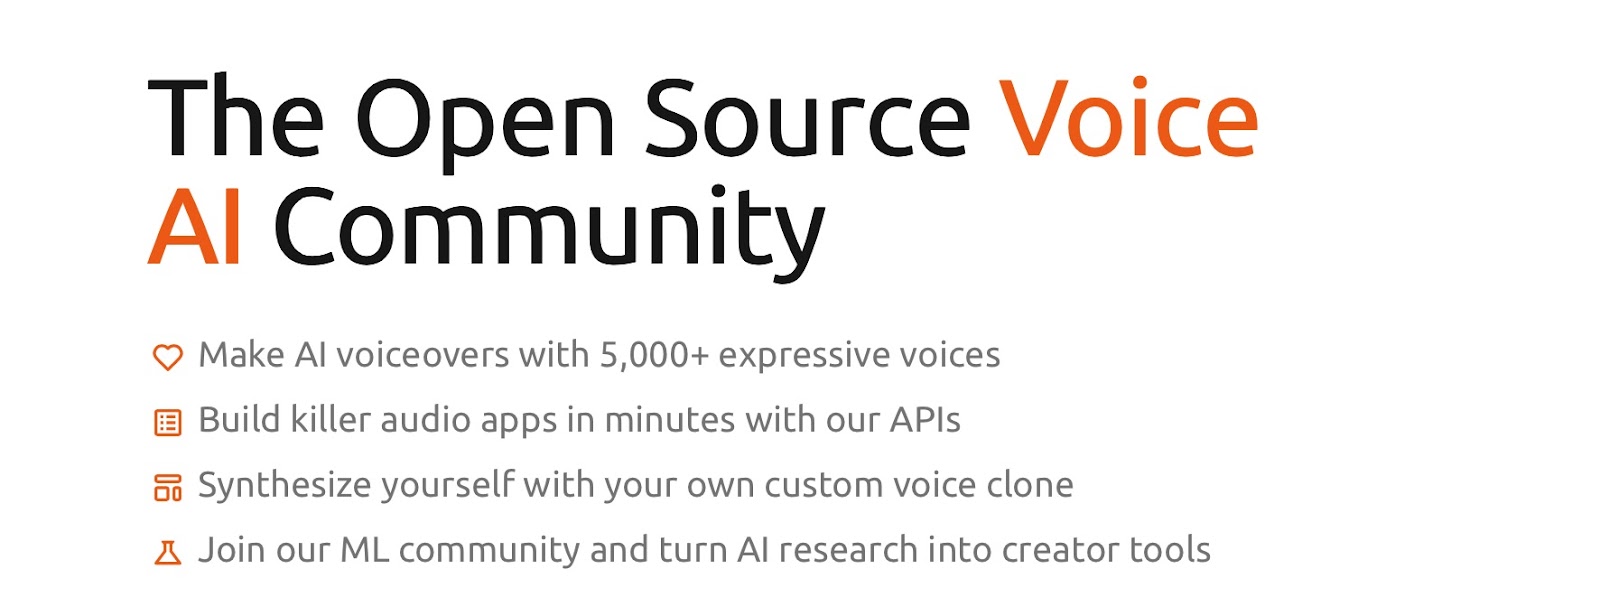 The heading "The Open Source Voice AI Community" sits at the top center of the page. The words "Voice AI" are in orange and the rest is in black. There are some icons beneath, each referencing one of the features of the website, including AI voiceovers, killer audio apps, custom voice clones. and a community that turns AI research into creator tools.